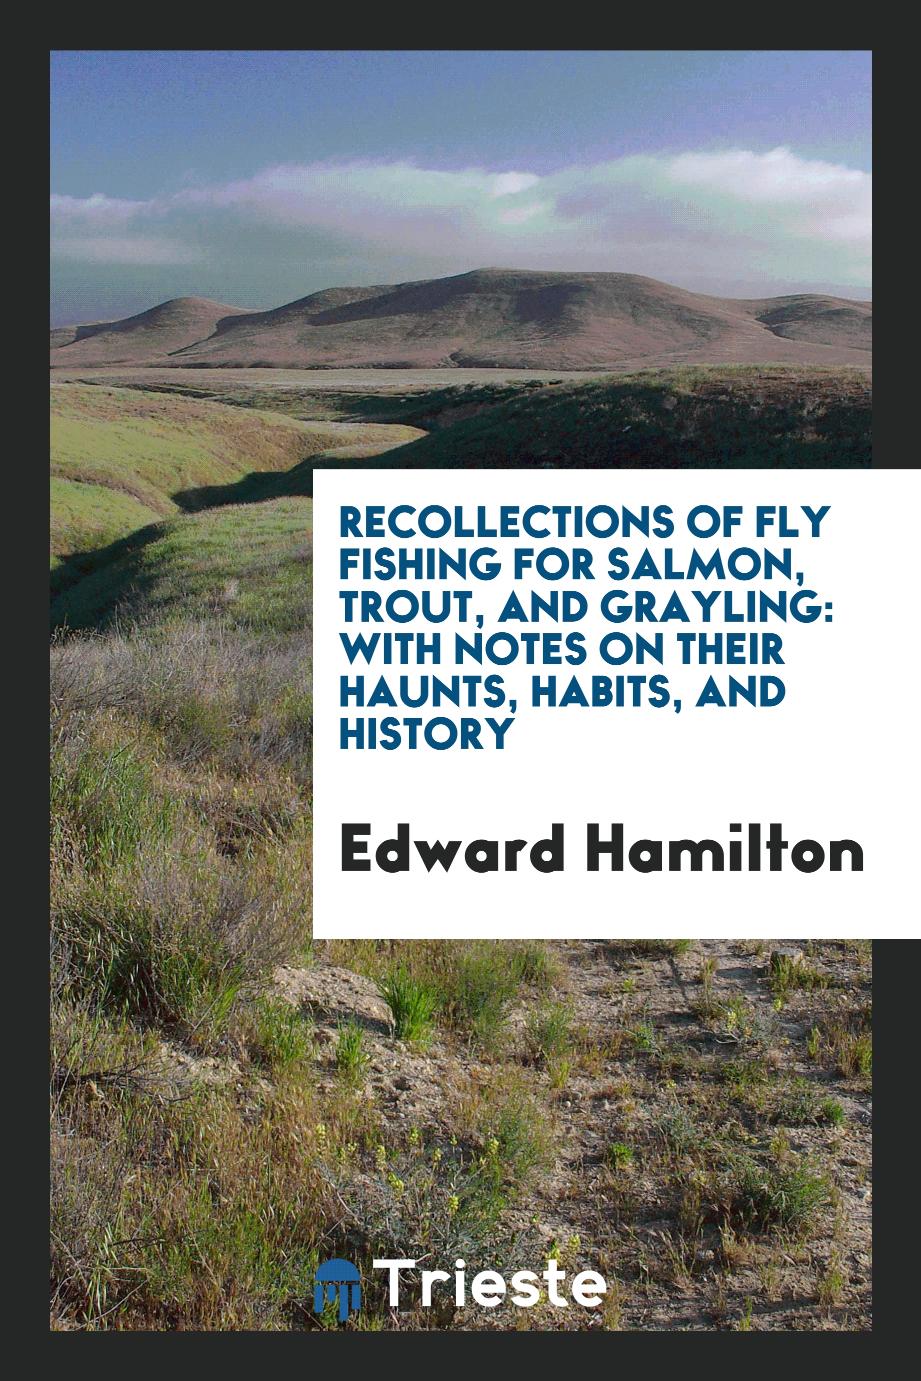 Recollections of Fly Fishing for Salmon, Trout, and Grayling: With Notes on Their Haunts, Habits, and History